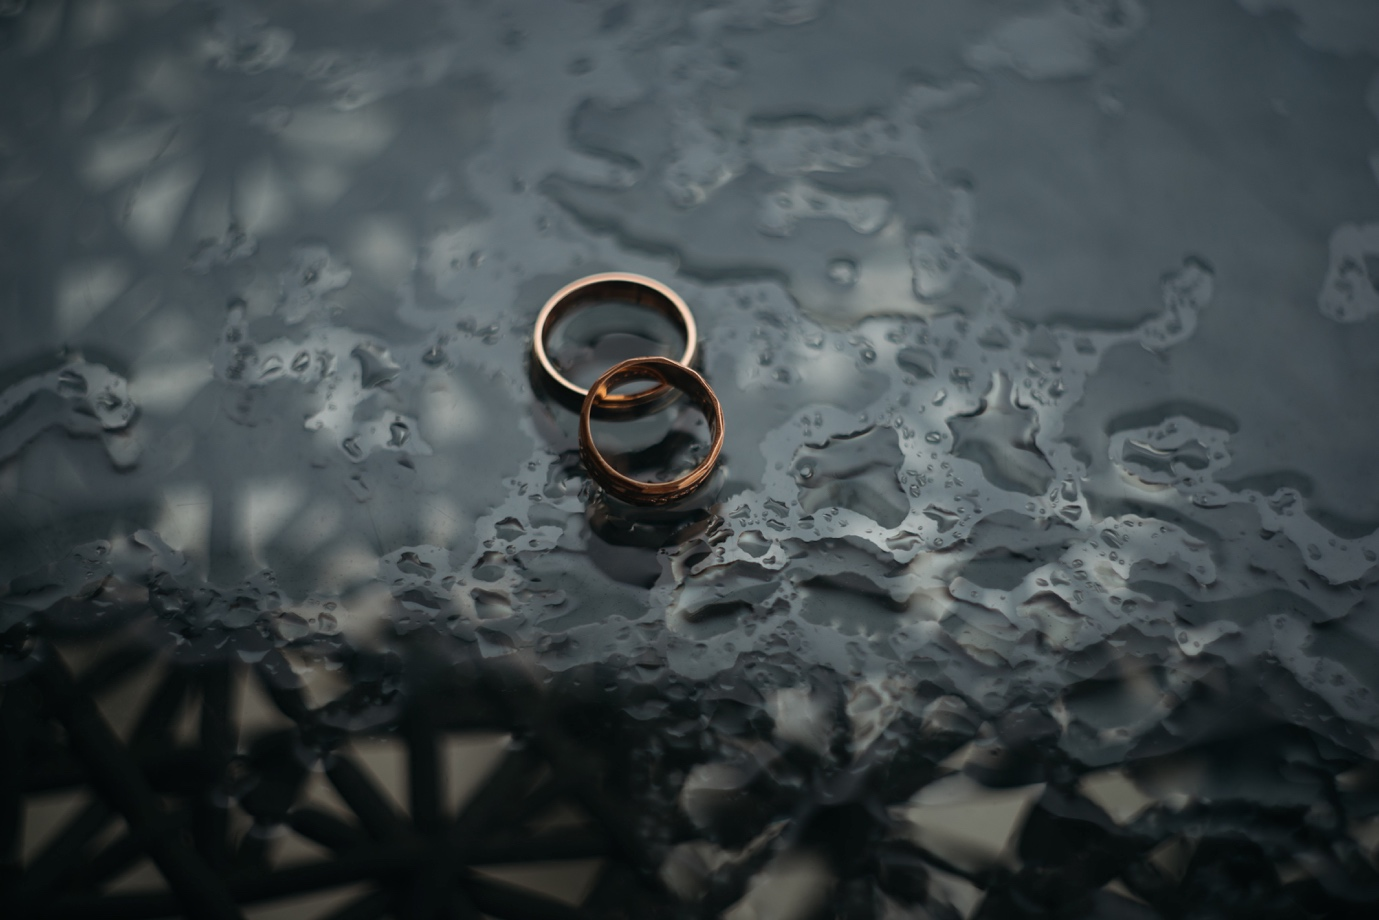 Two wedding rings on a glass table with rain water